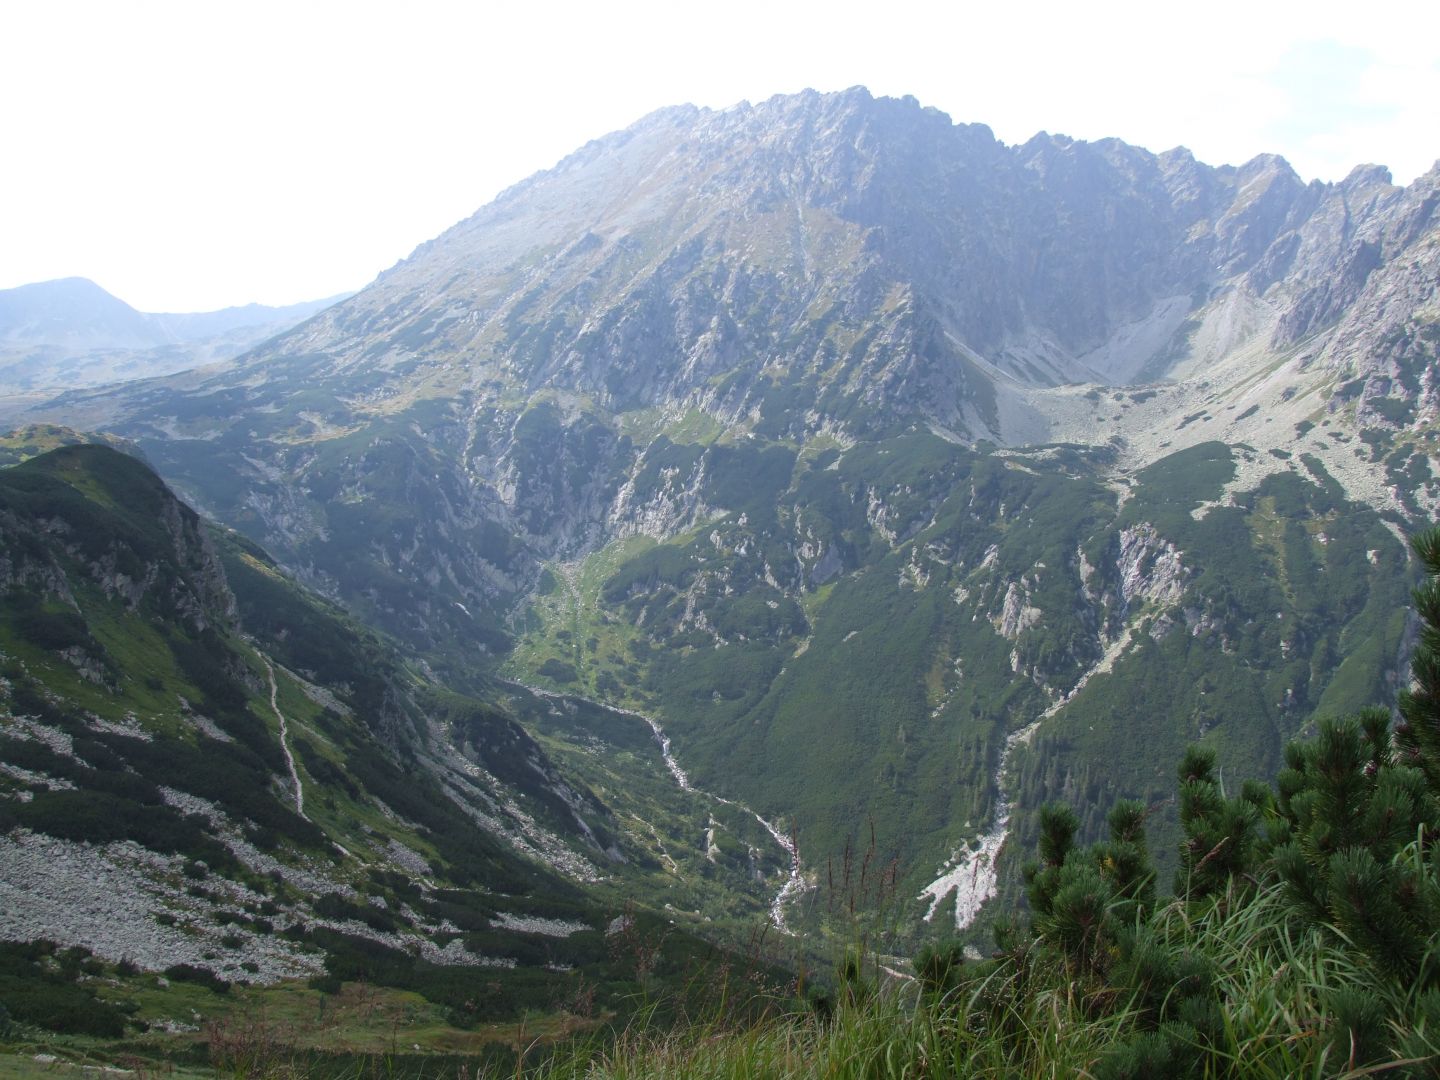 The Roztoki Valley seen from the trail to Morskie Oko